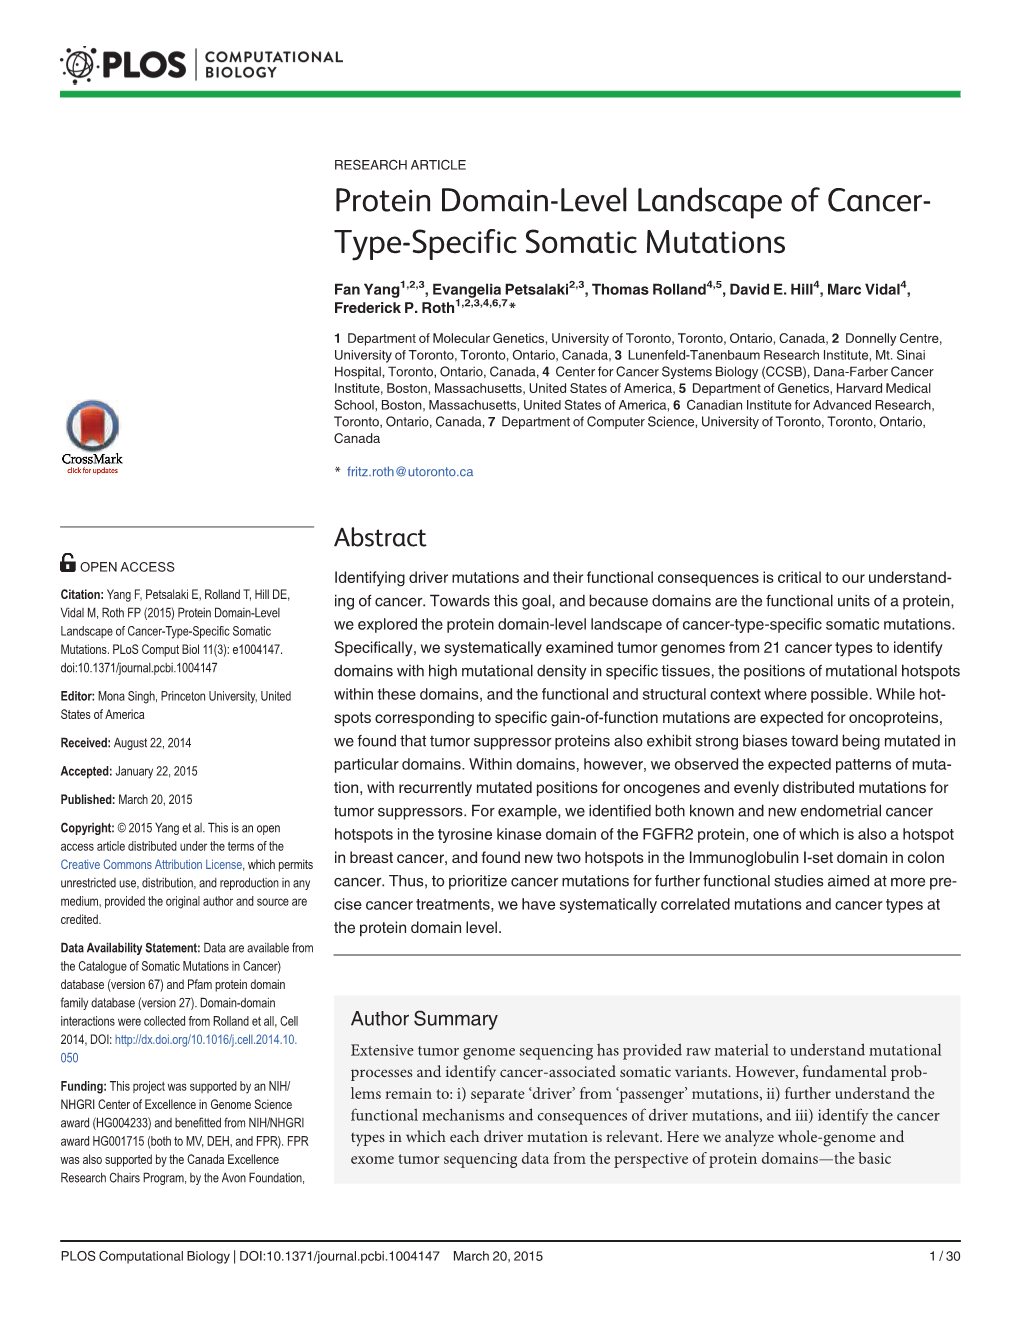 Protein Domain-Level Landscape of Cancer-Type-Specific Somatic We Explored the Protein Domain-Level Landscape of Cancer-Type-Specific Somatic Mutations